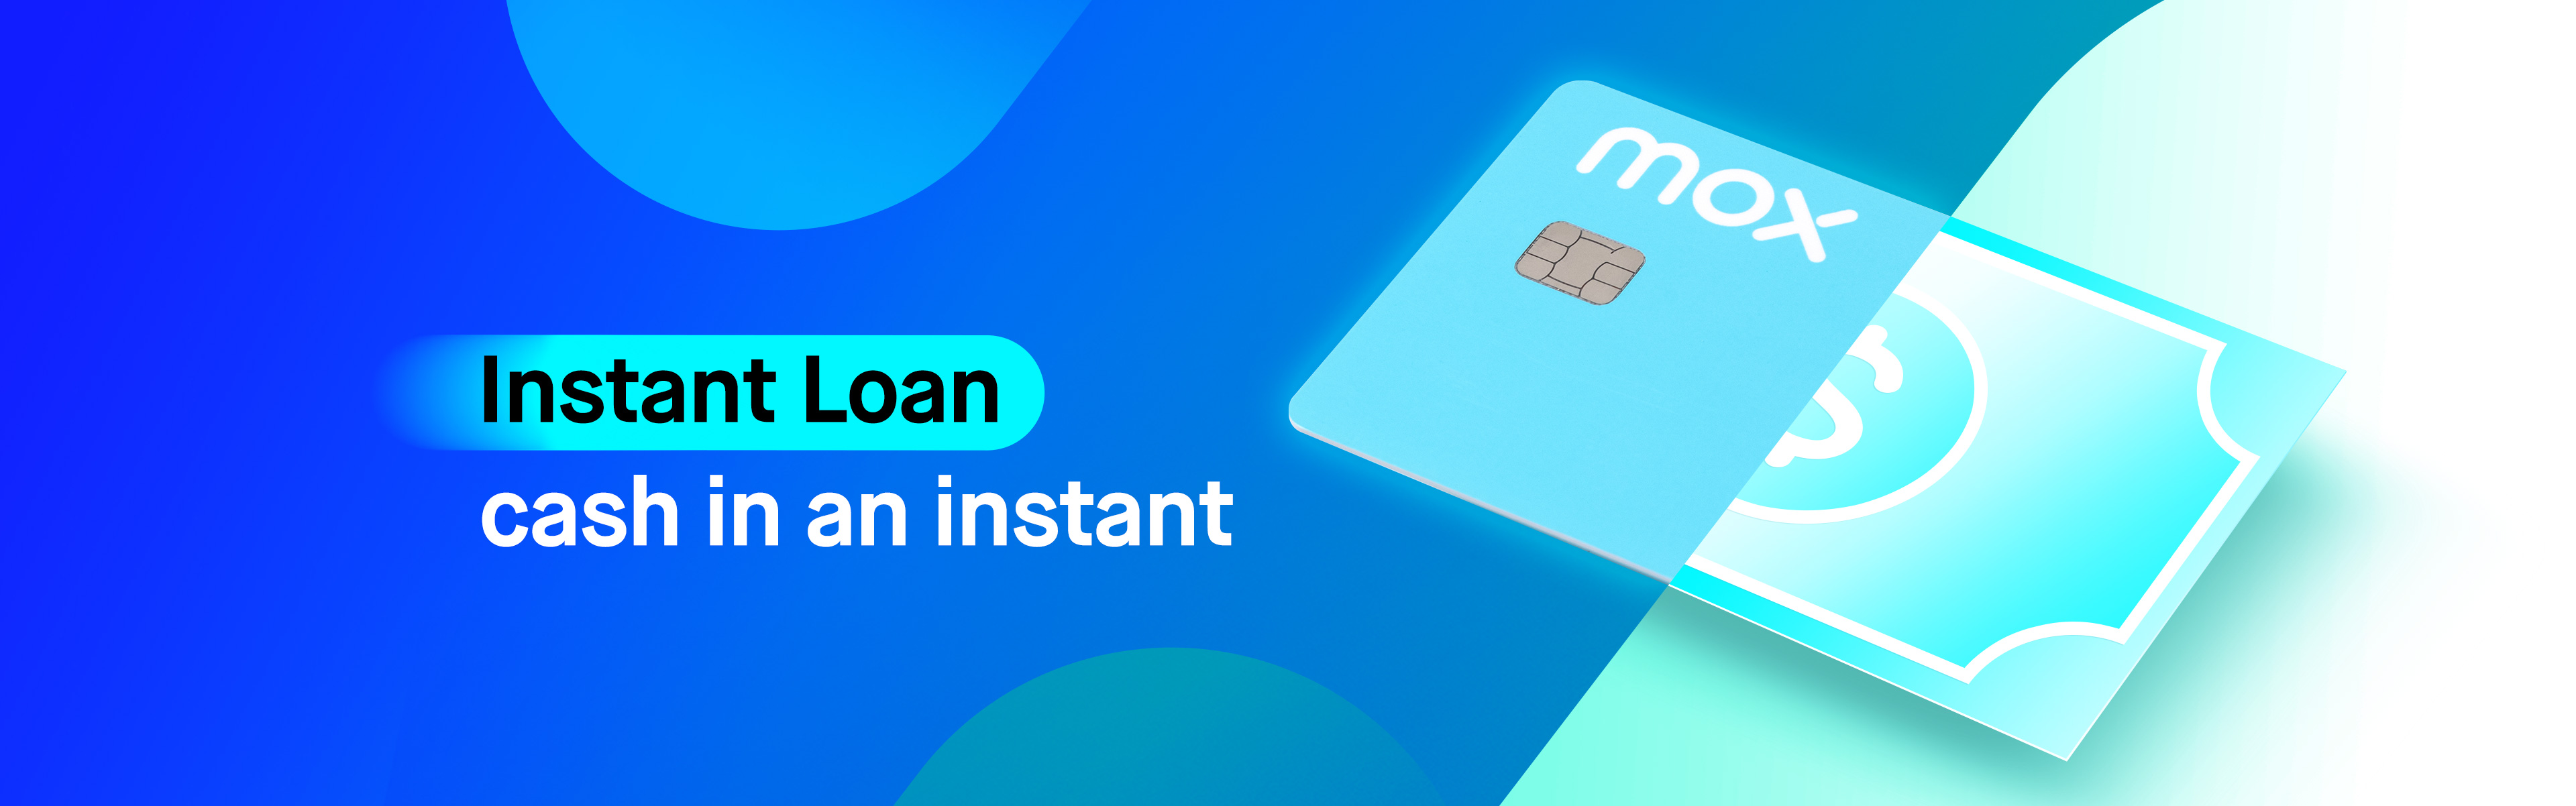 Instant Loan: Get a loan of HKD200,000 for less than HKD4  interest  per day*